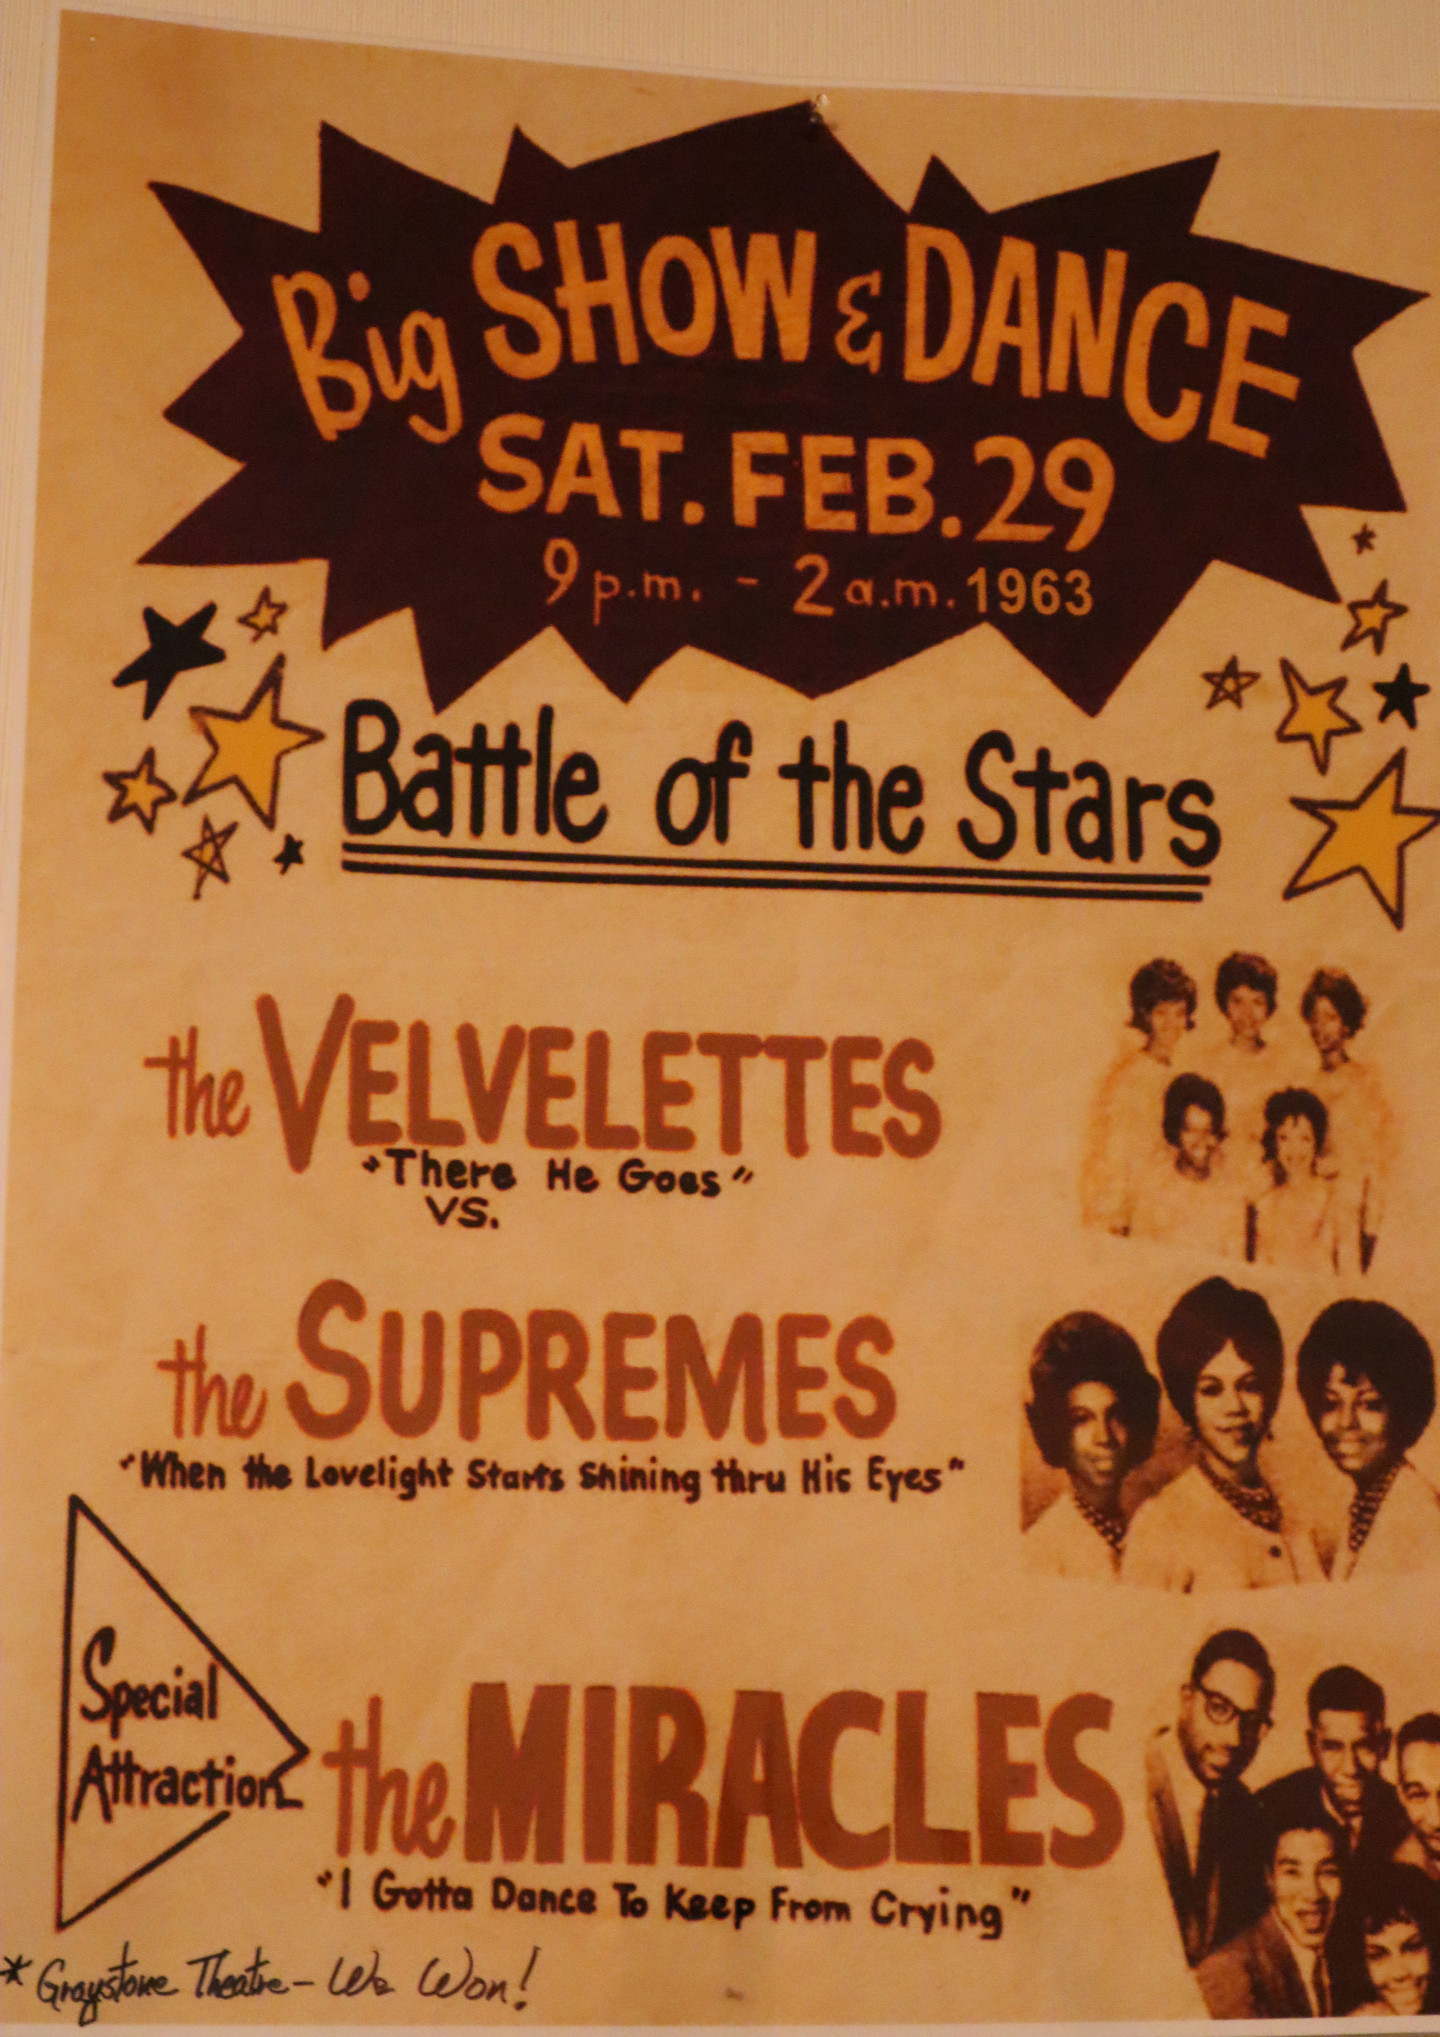 A promotional poster.